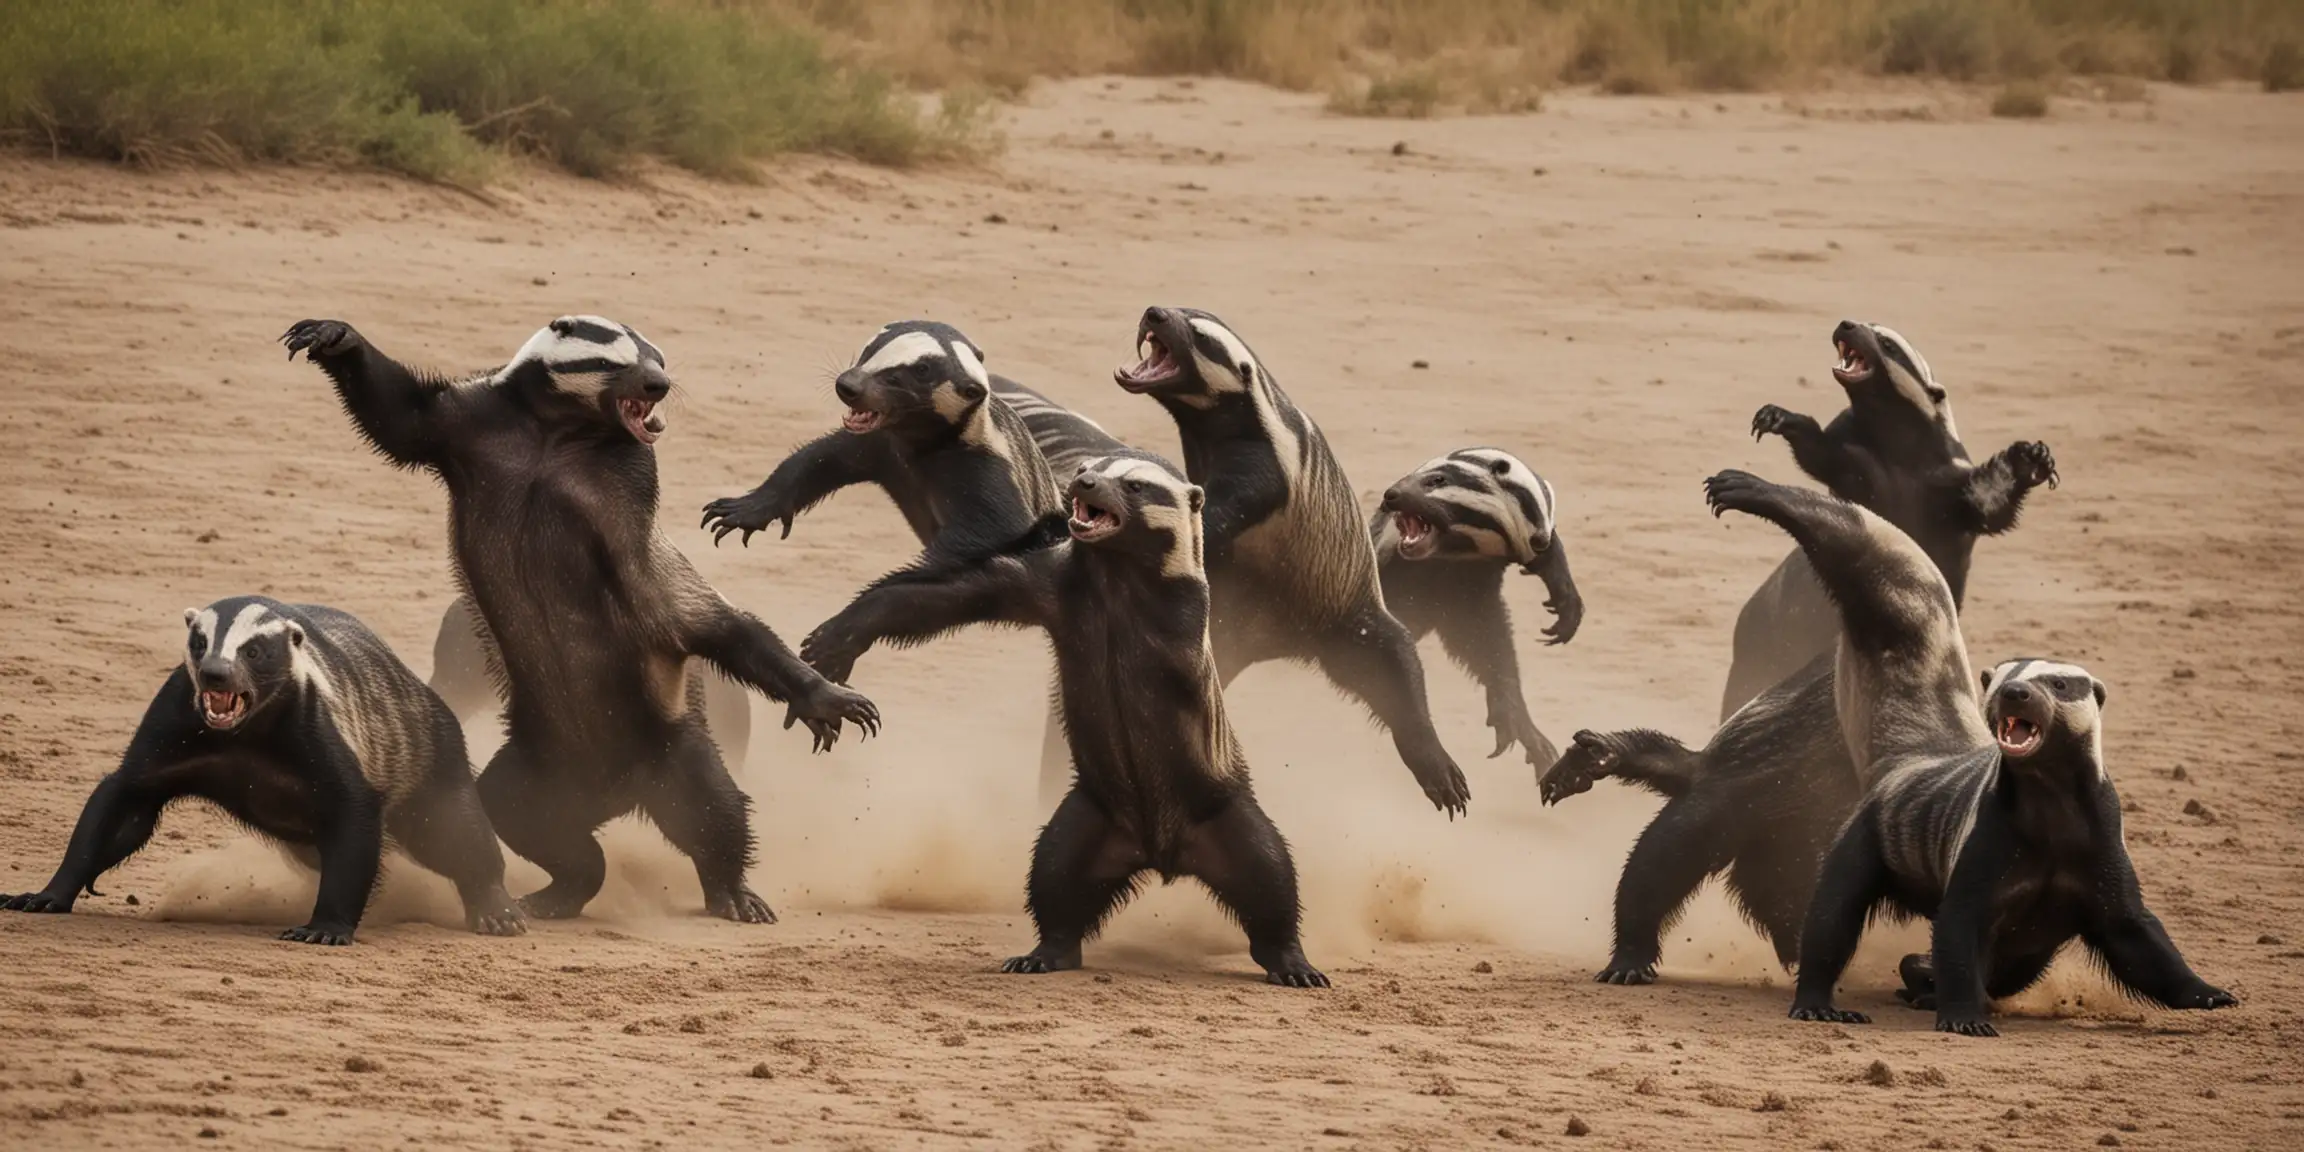 PHOTO GRAPH OF HONEY BADGERS HAVING A RIOT